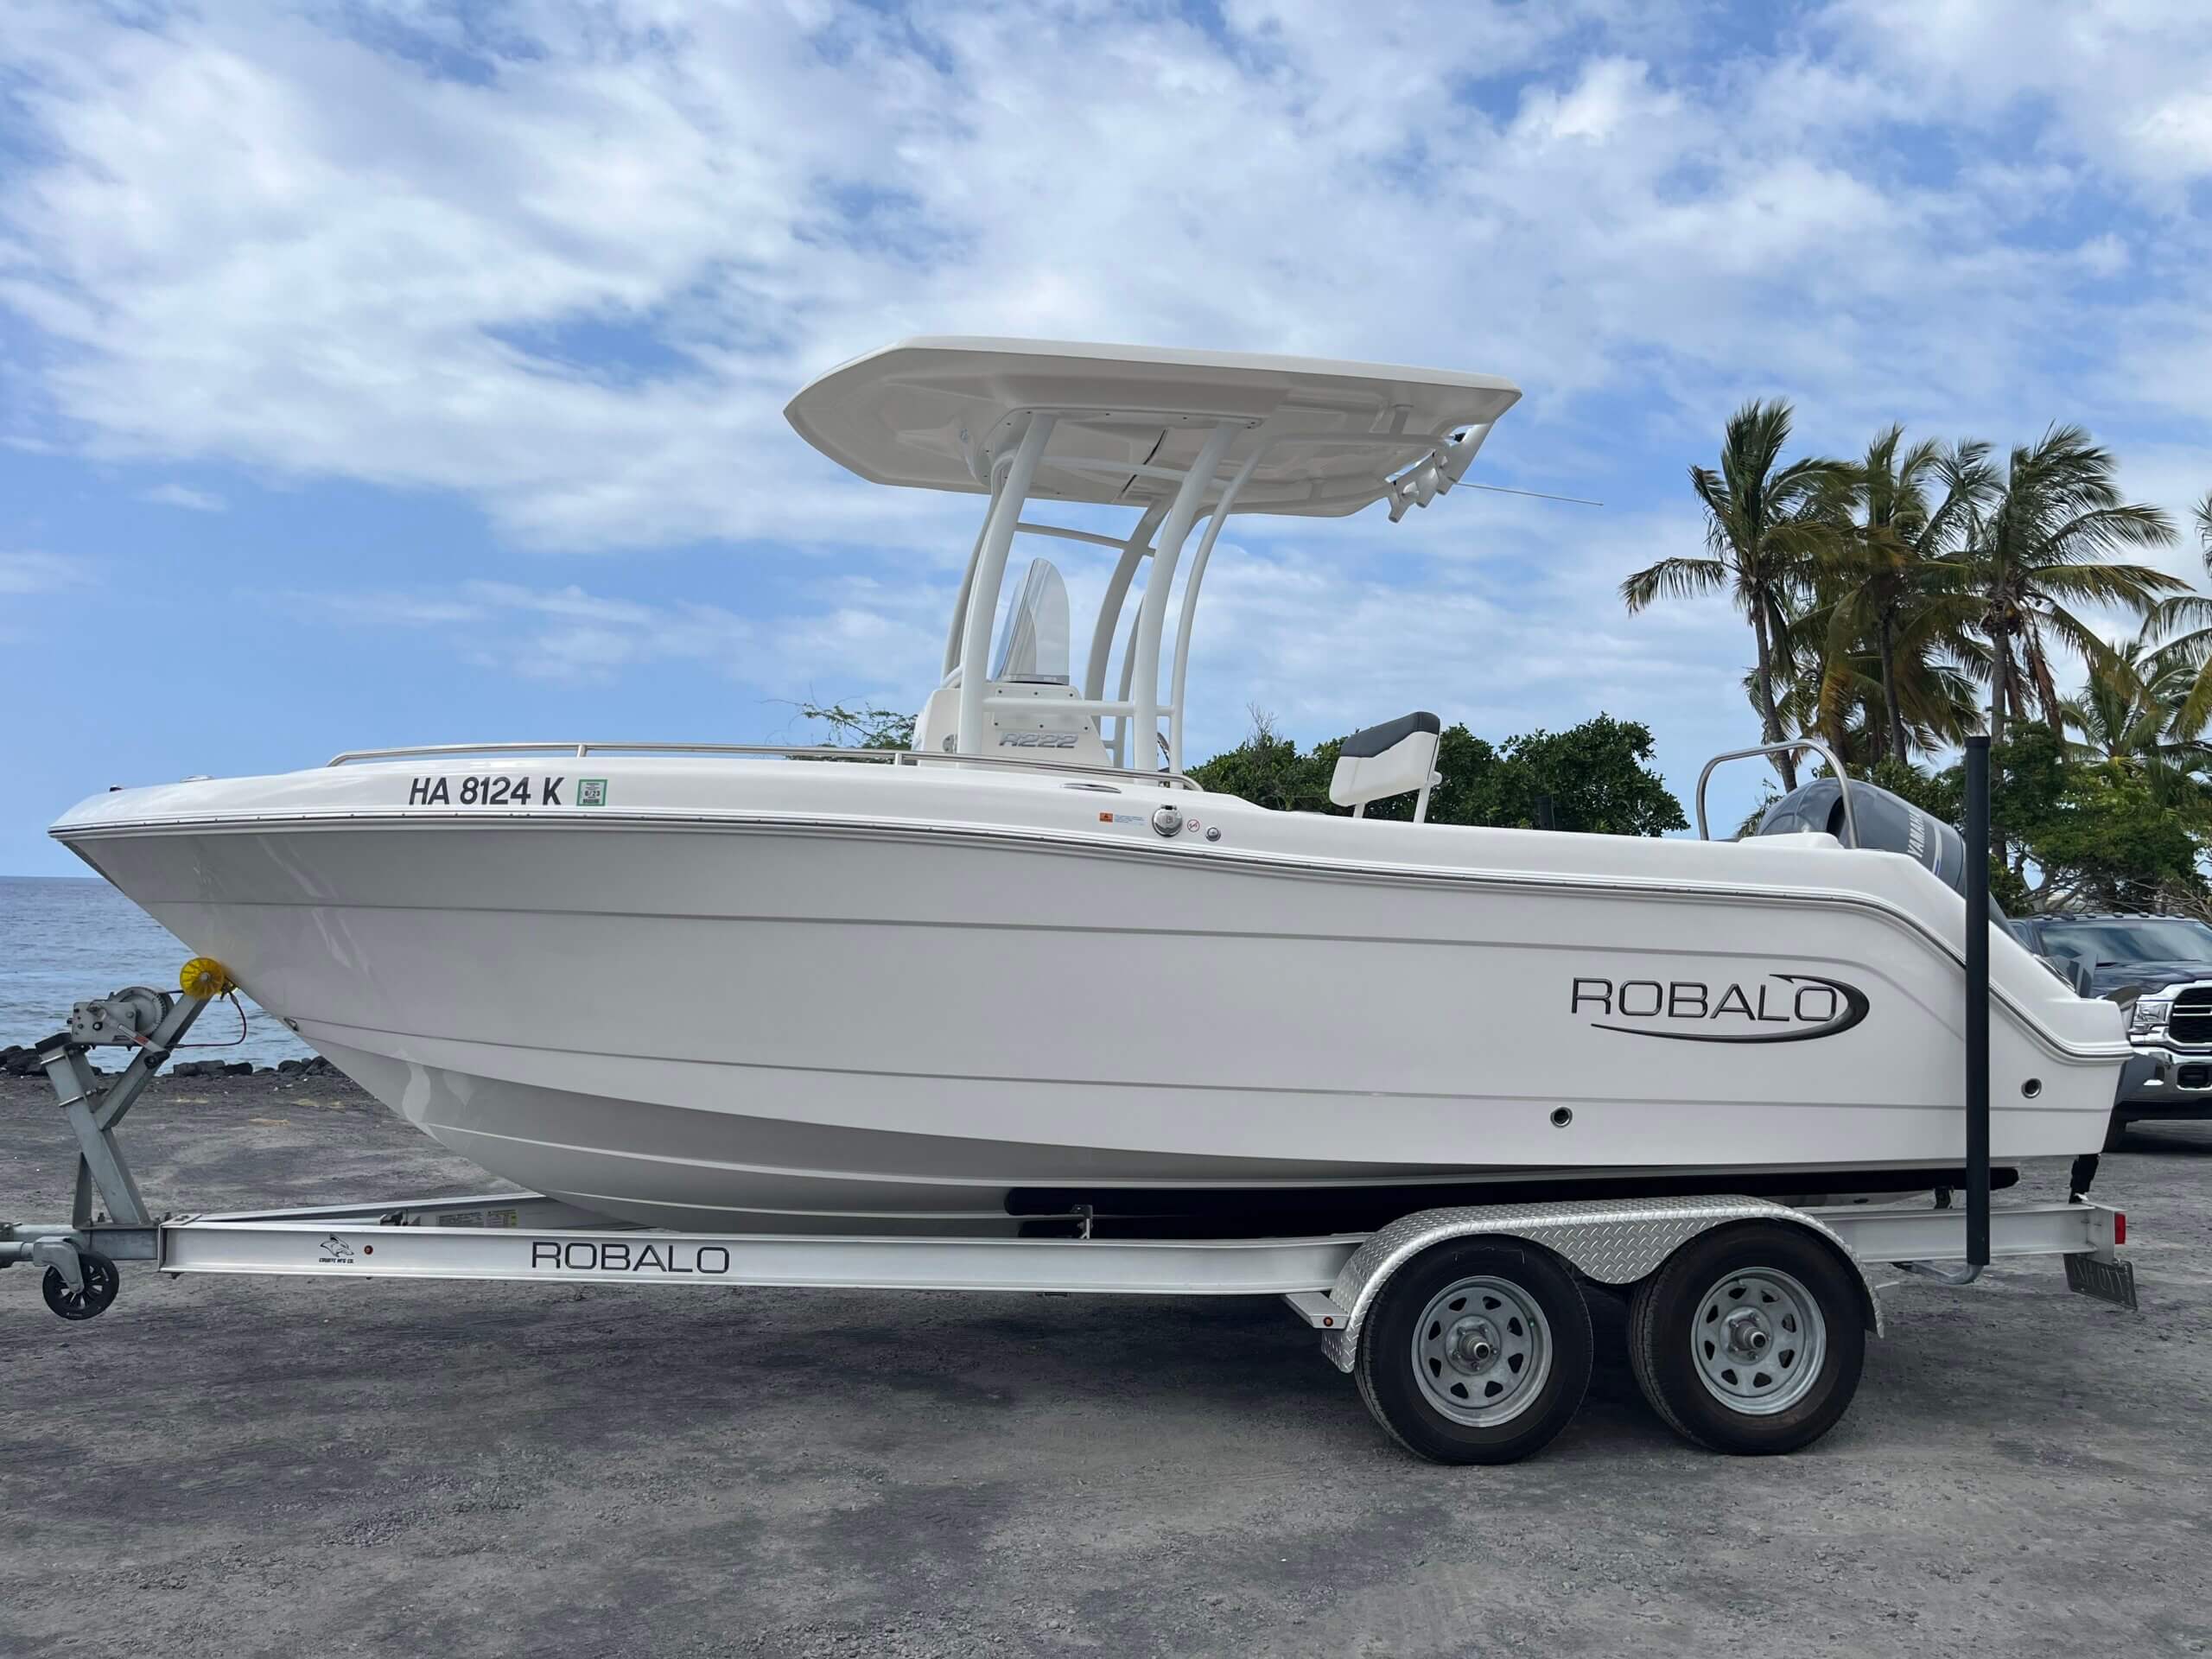 Newly purchased Robalo speed boat on a trailer